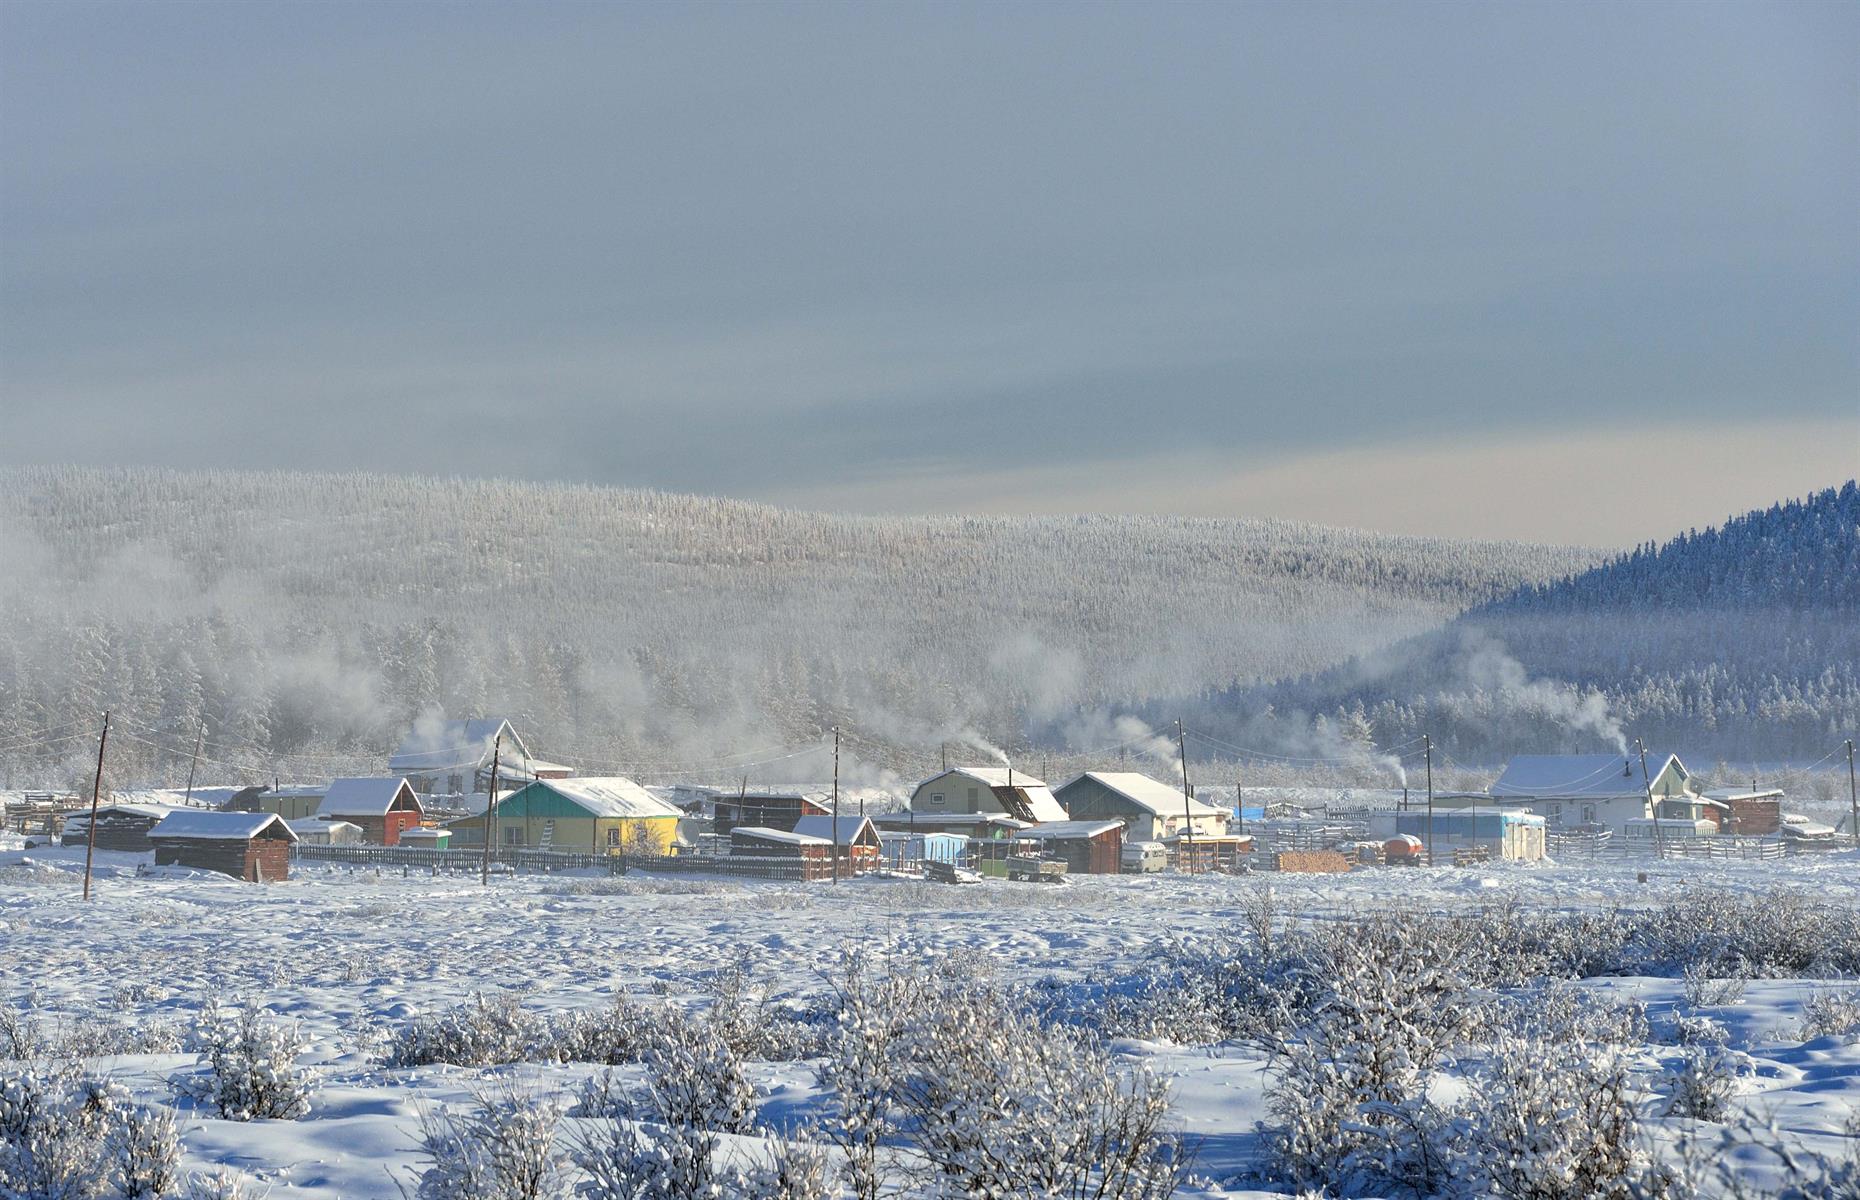 <p>An almost inhospitable location, the town of Oymyakon in Russia is closer to the Arctic Circle than it is to the nearest city. Frostbite blights the lives of the local residents in the isolated village, which has been labelled the coldest permanently inhabited place on Earth. </p>